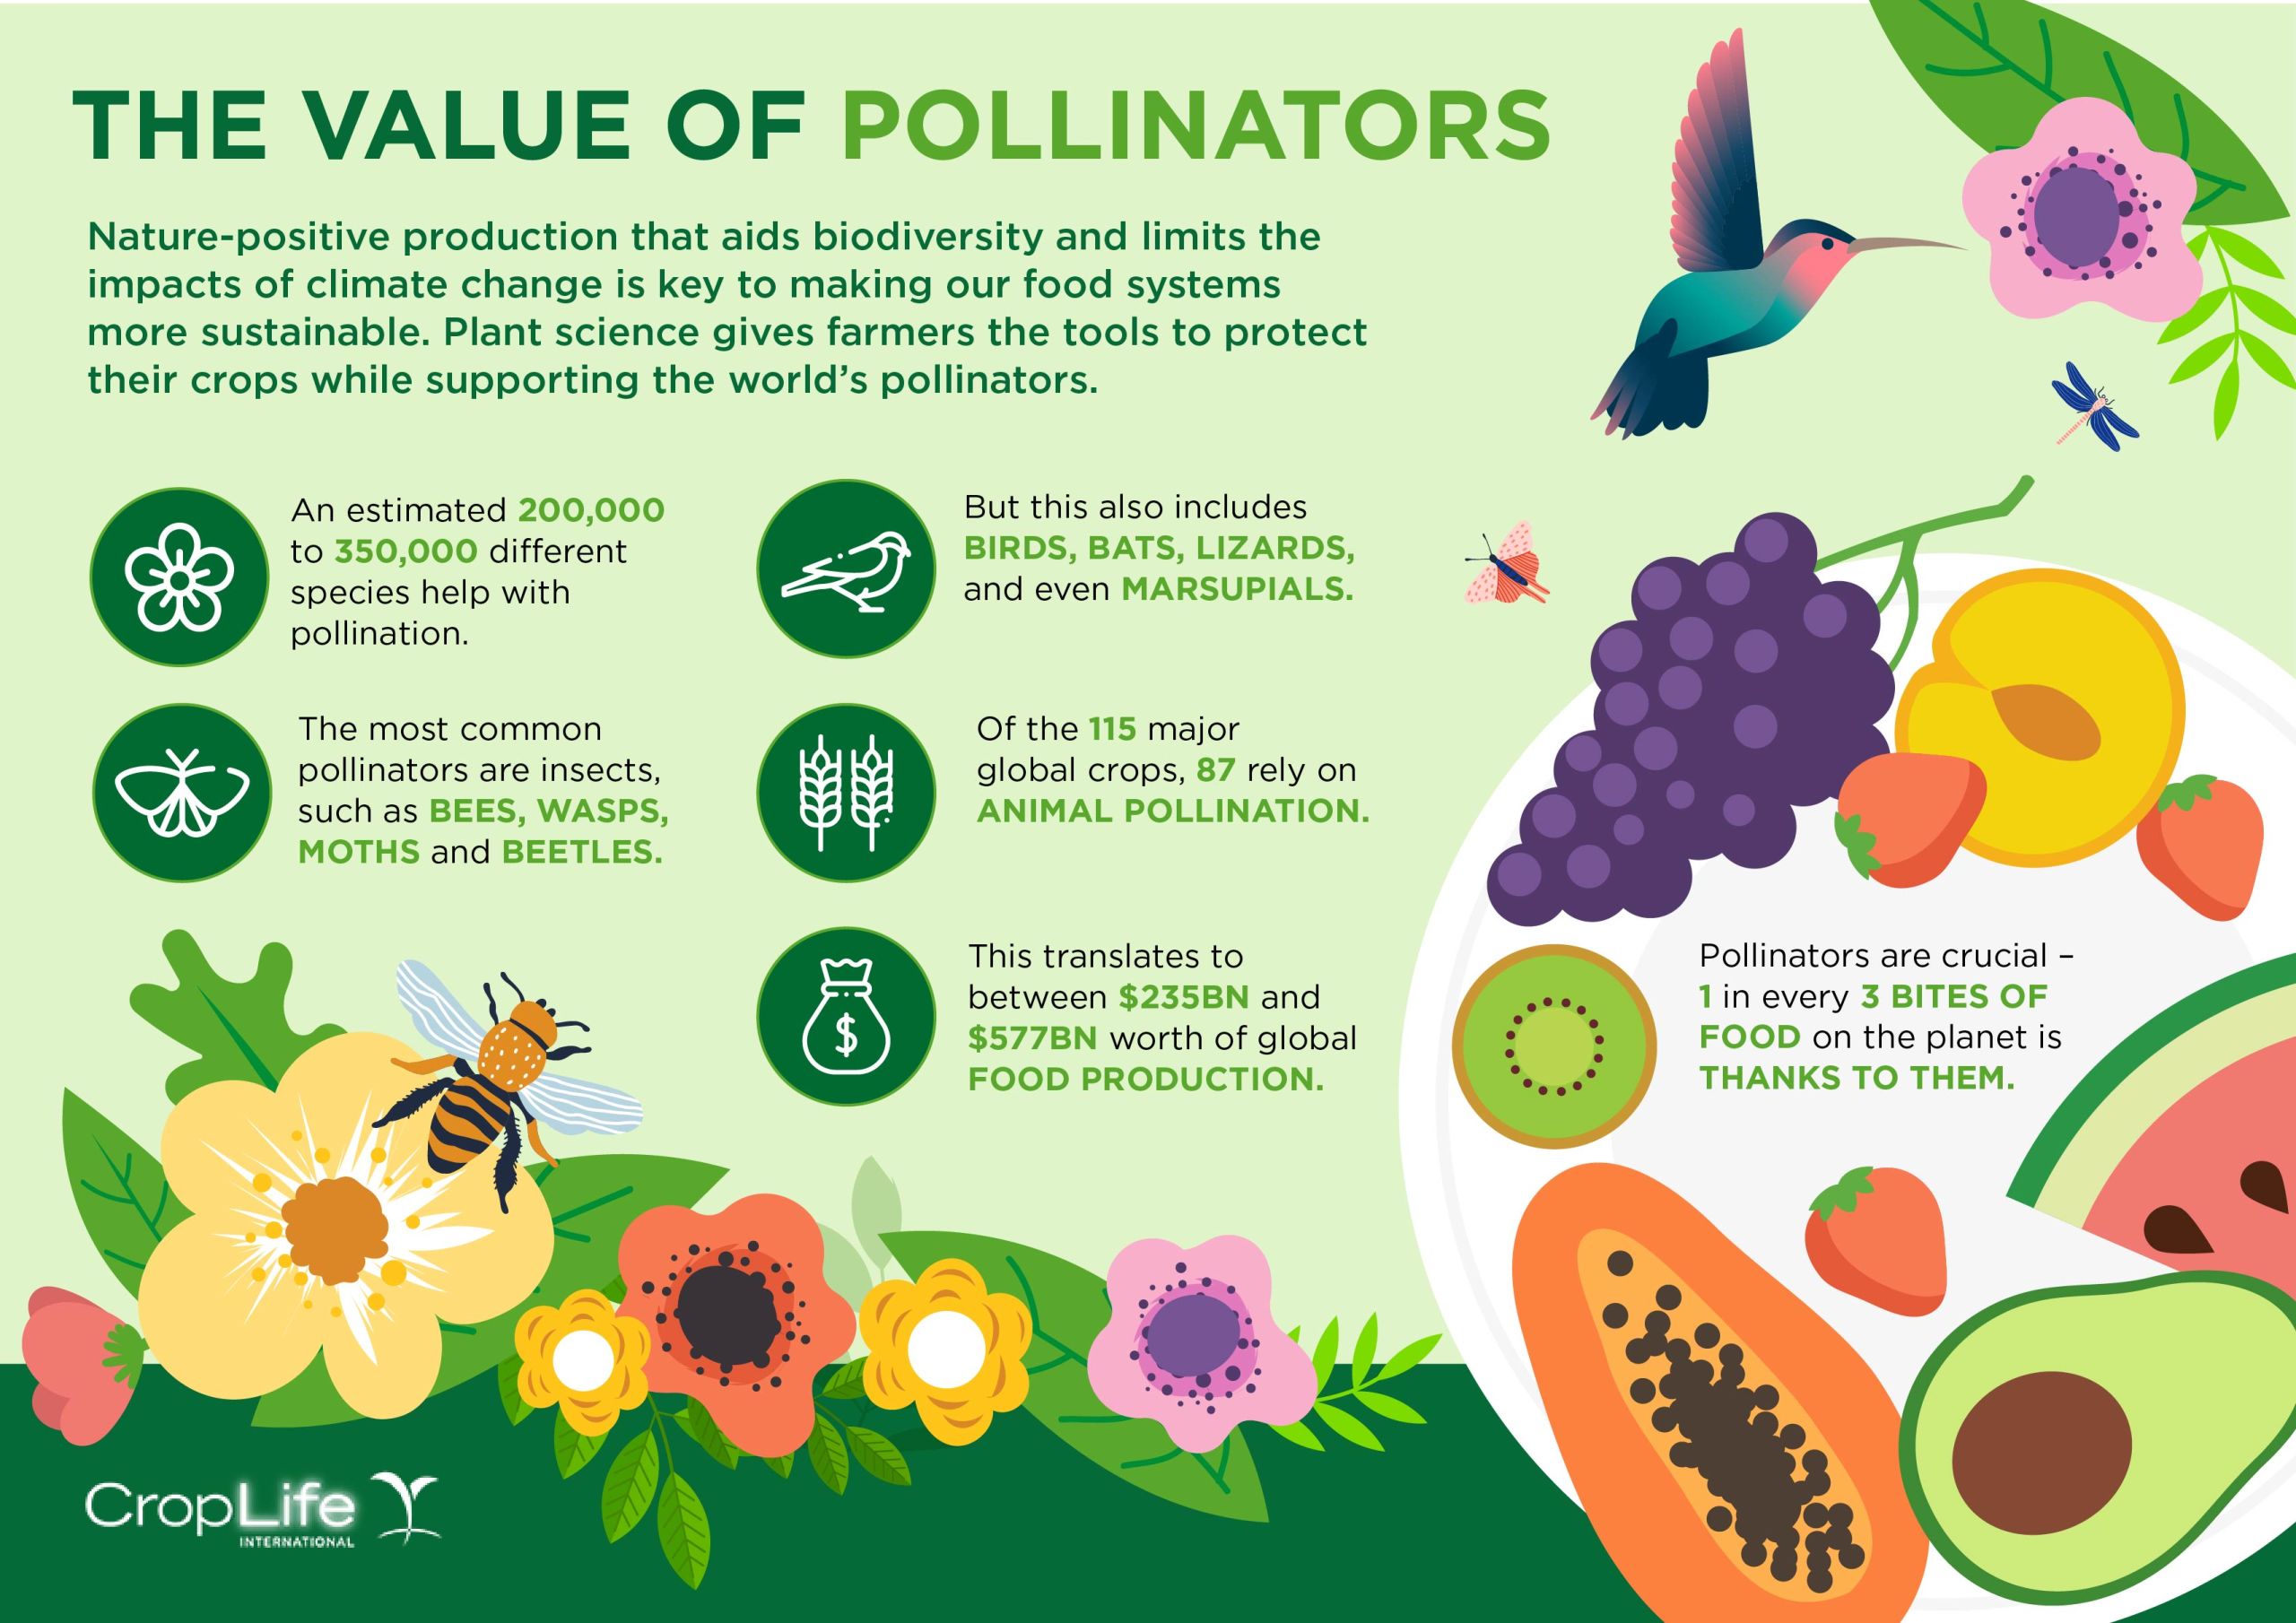 III. The Decline of Pollinators and its Impact on Food Security